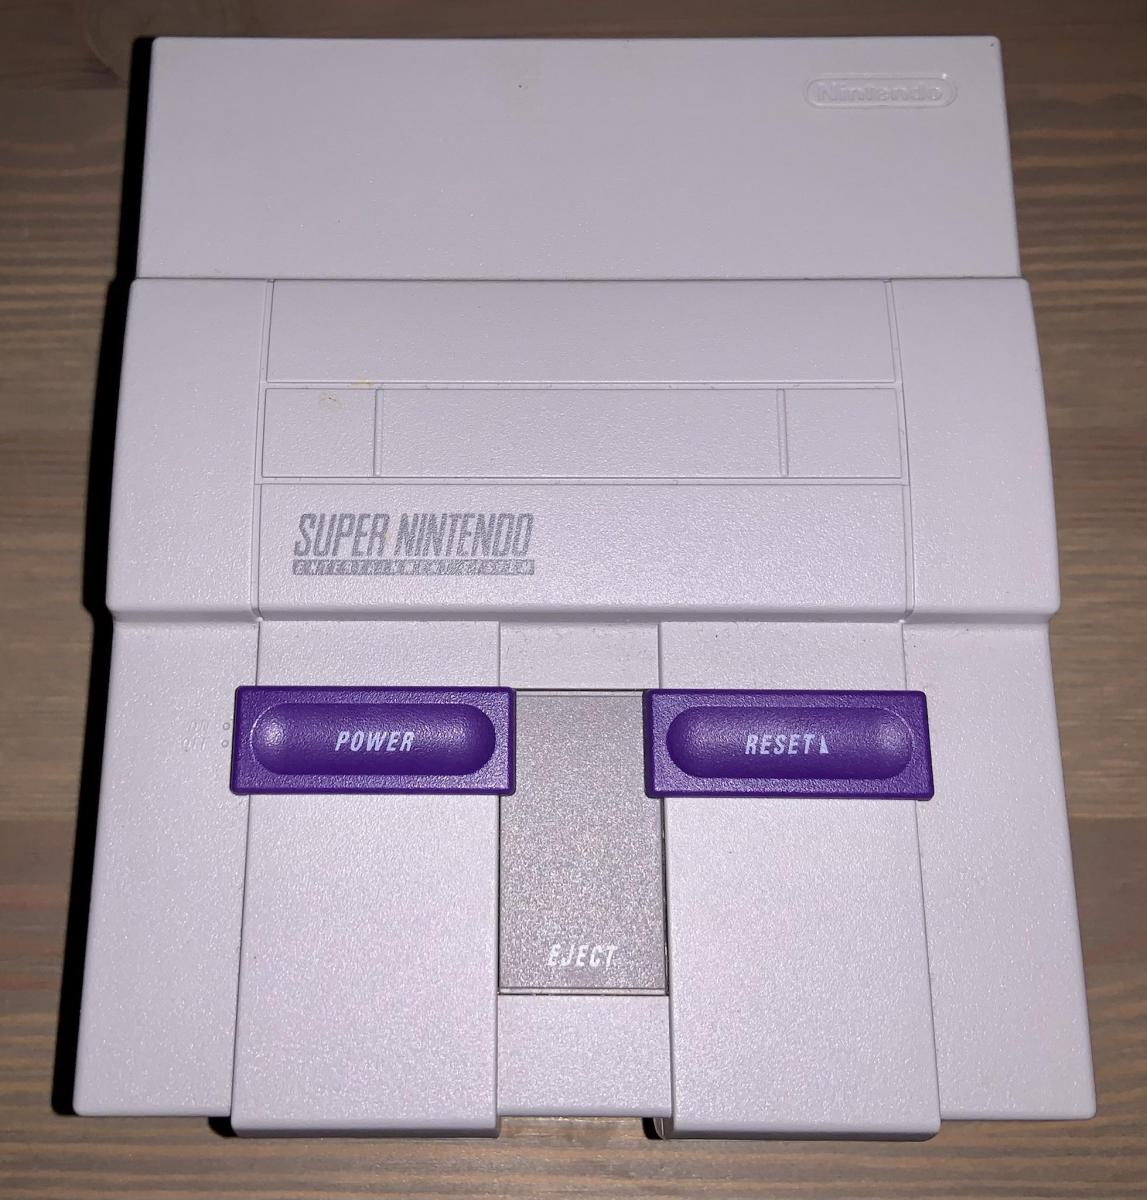 For sale Nintendo Super Nintendo Classic Edition (Mini) hacked with extra games